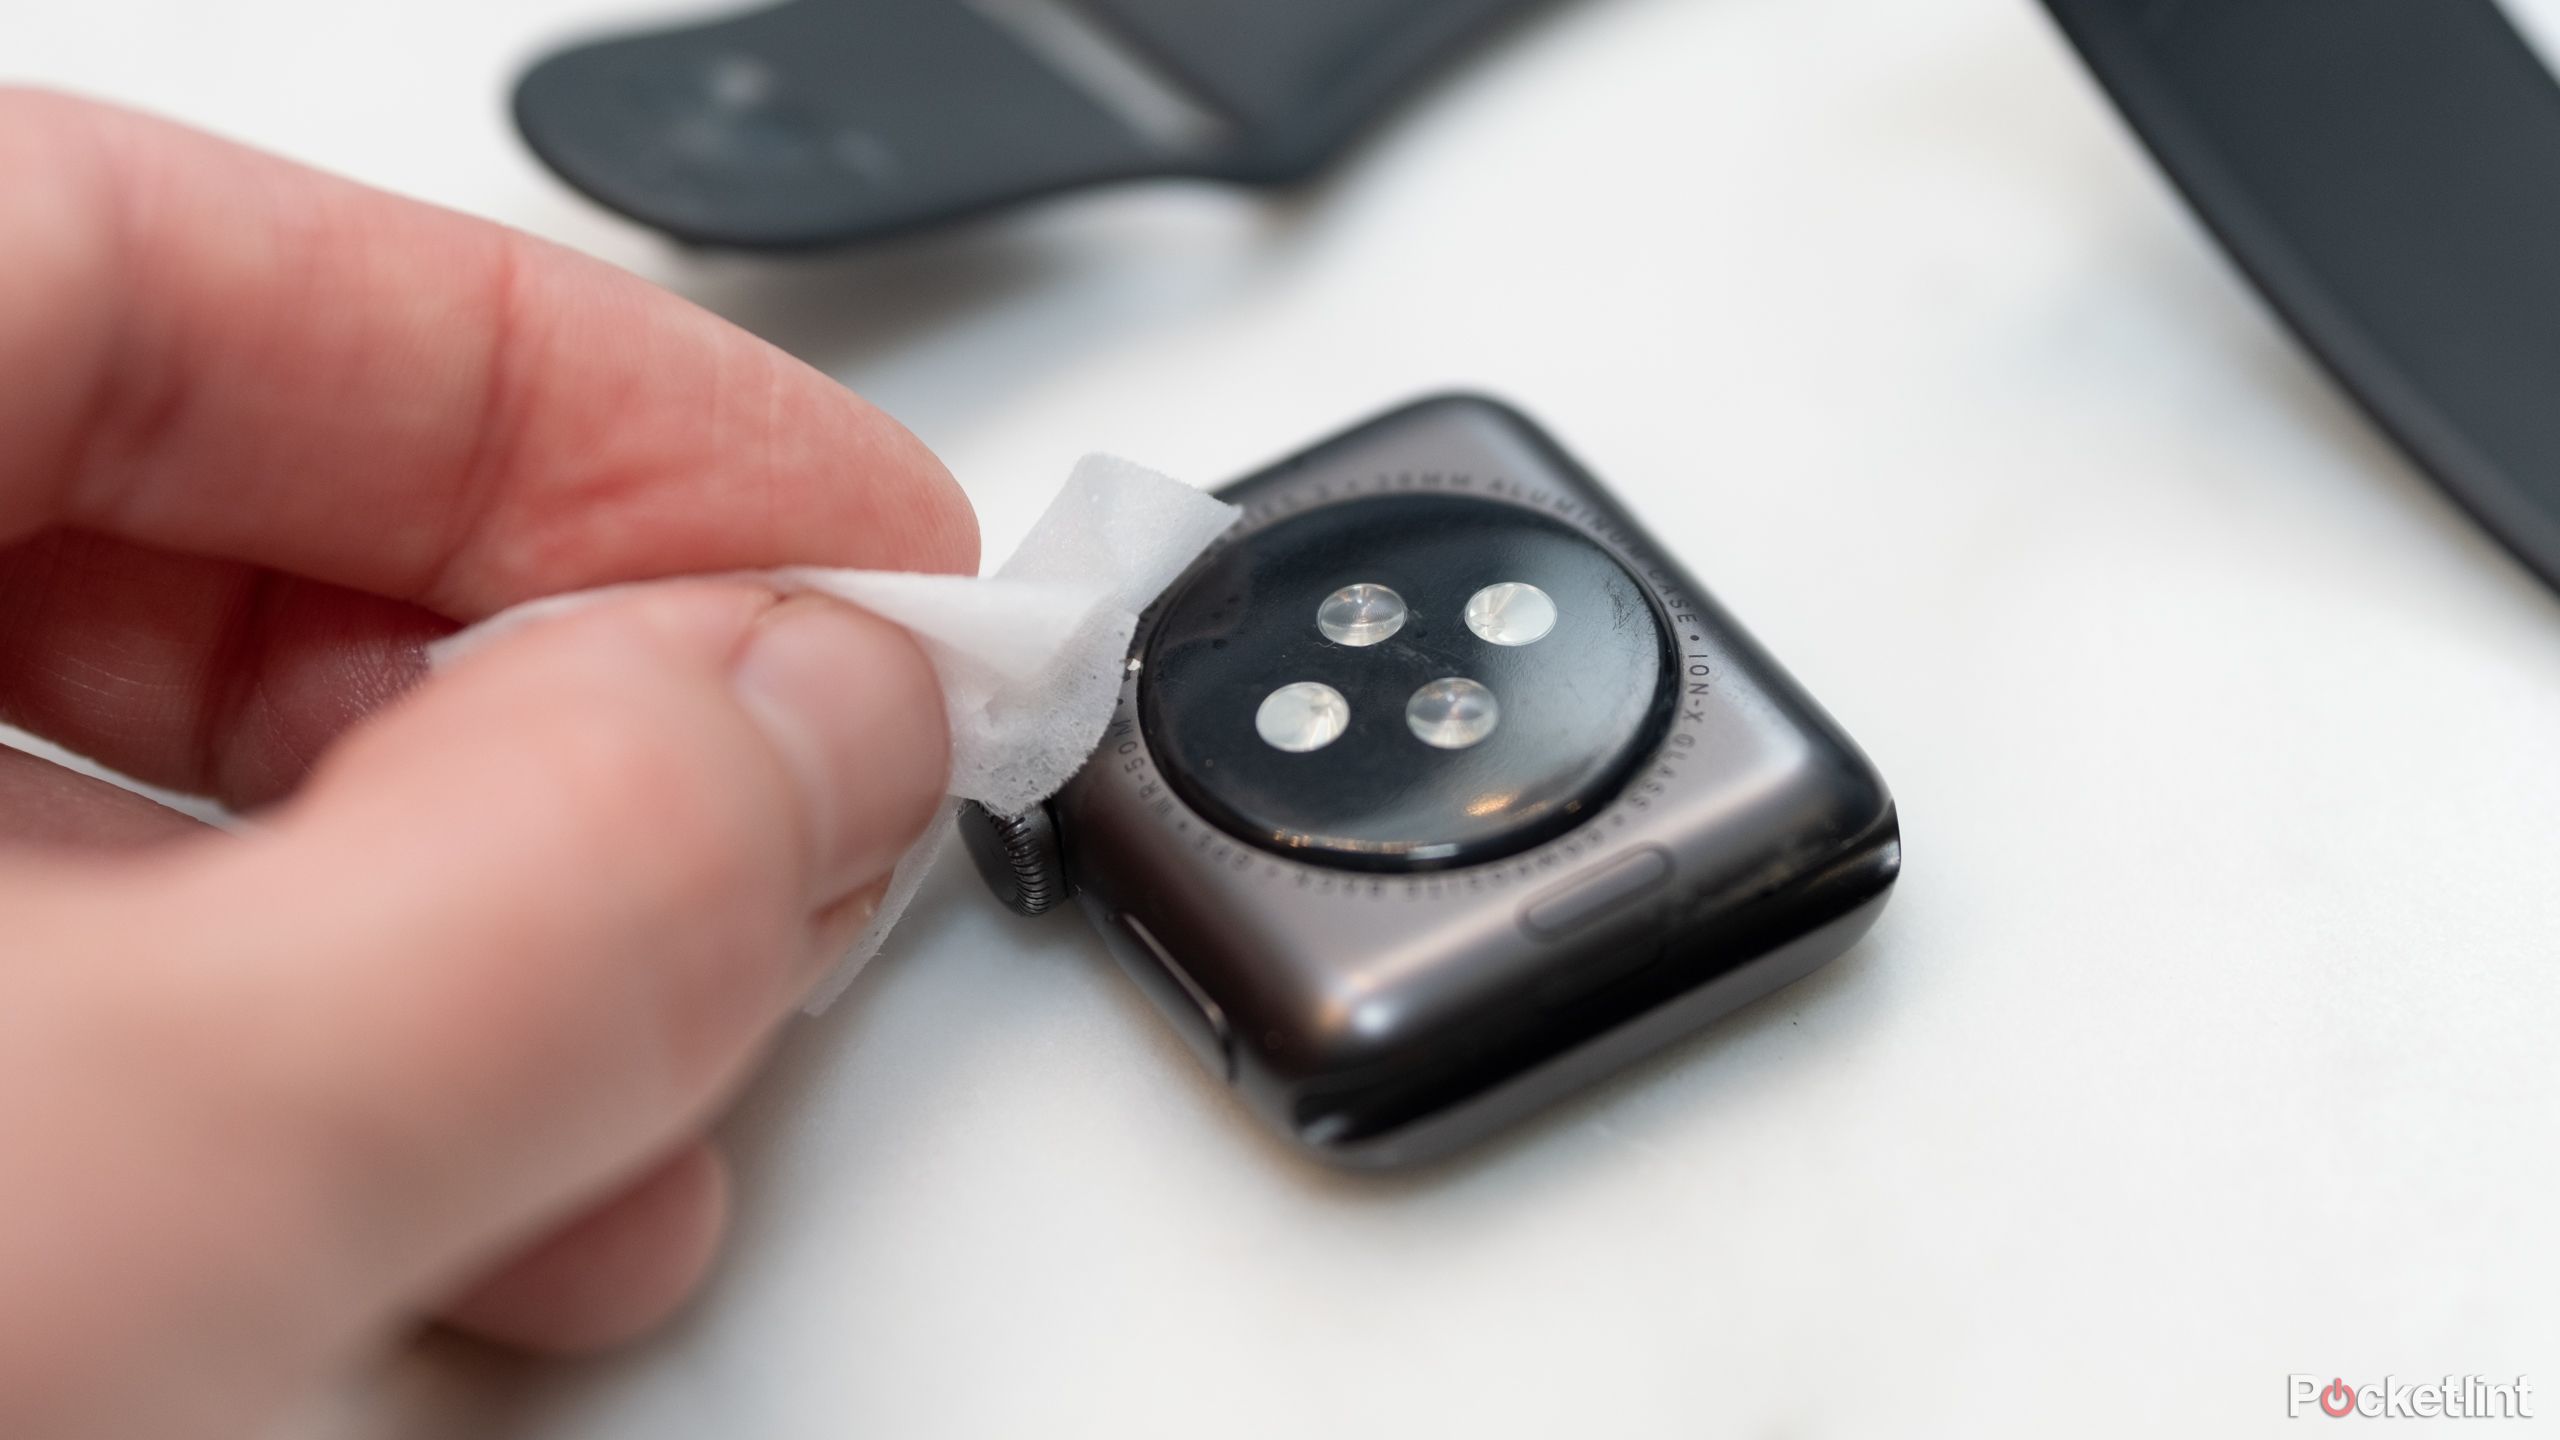 A hand cleans a smartwatch with an alcohol wipe.